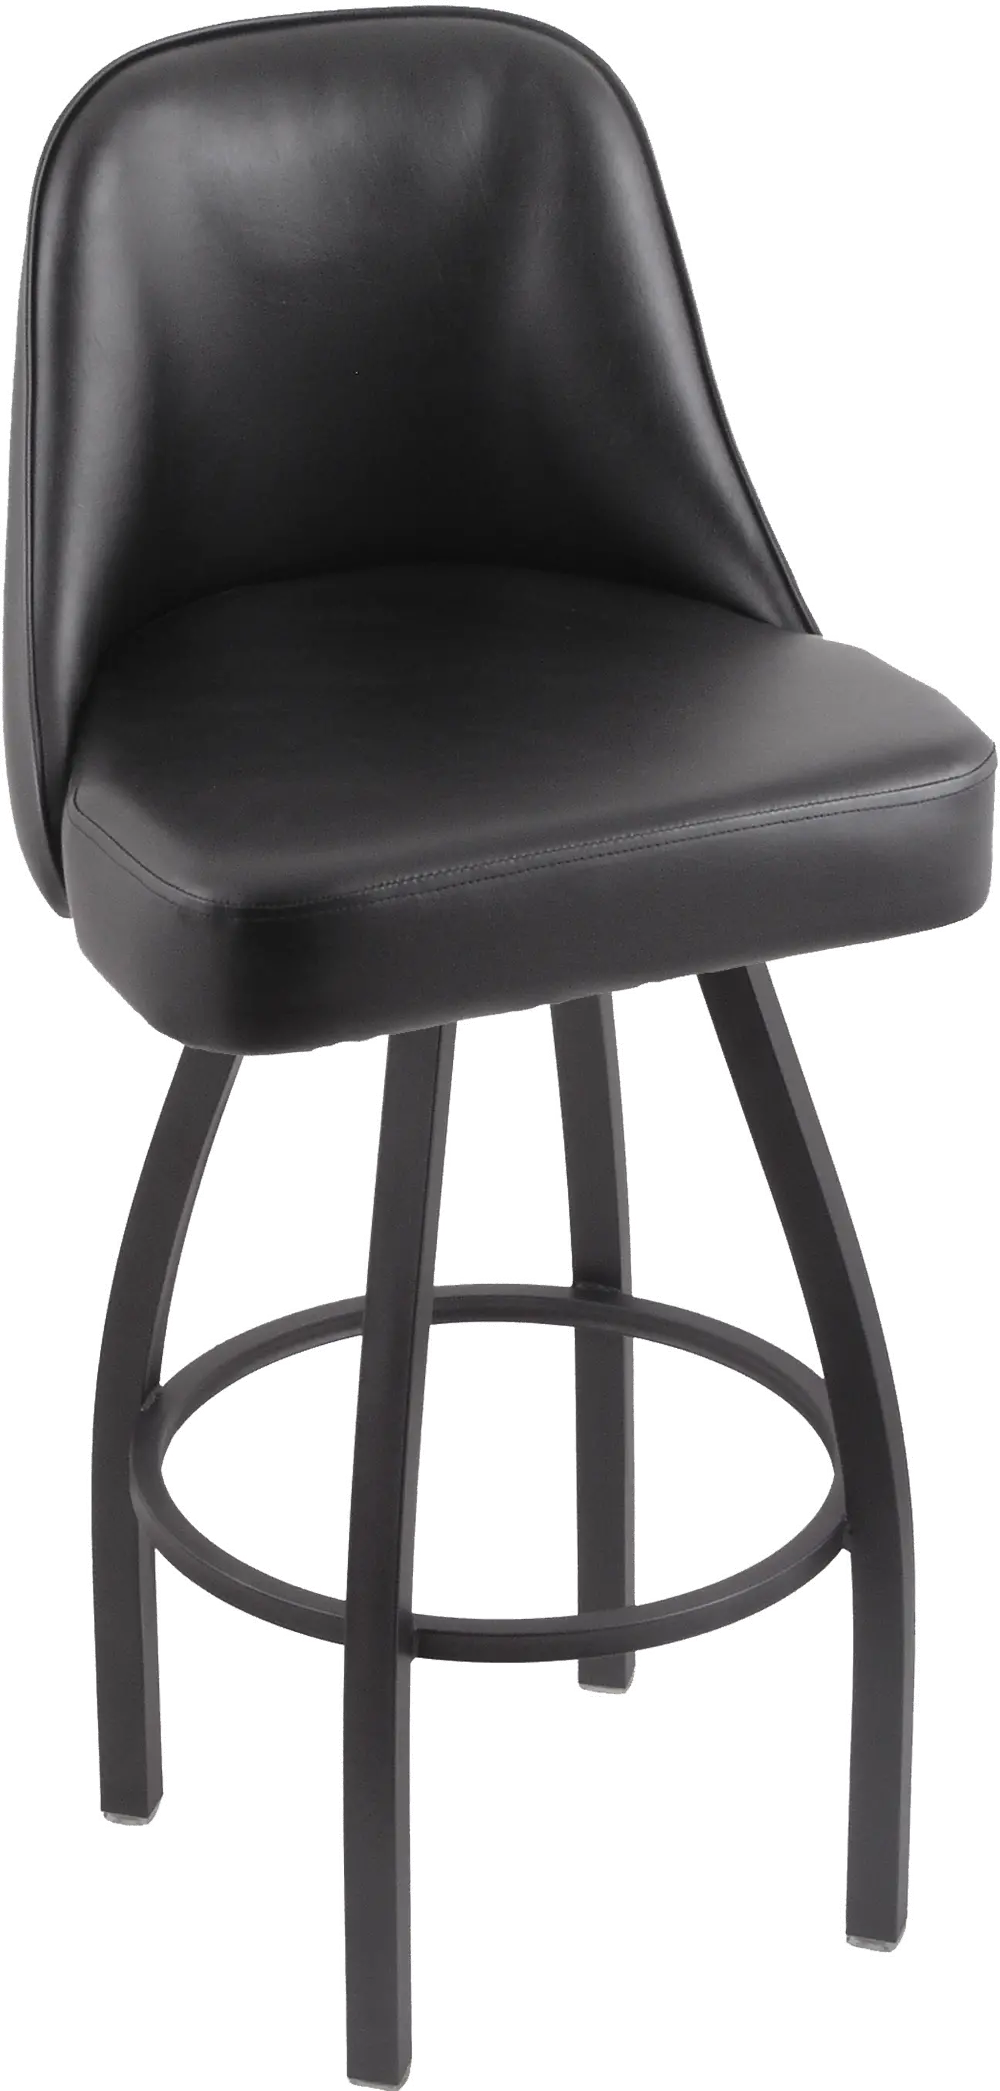 Grizzly Pewter Upholstered Swivel Bar Stool-1